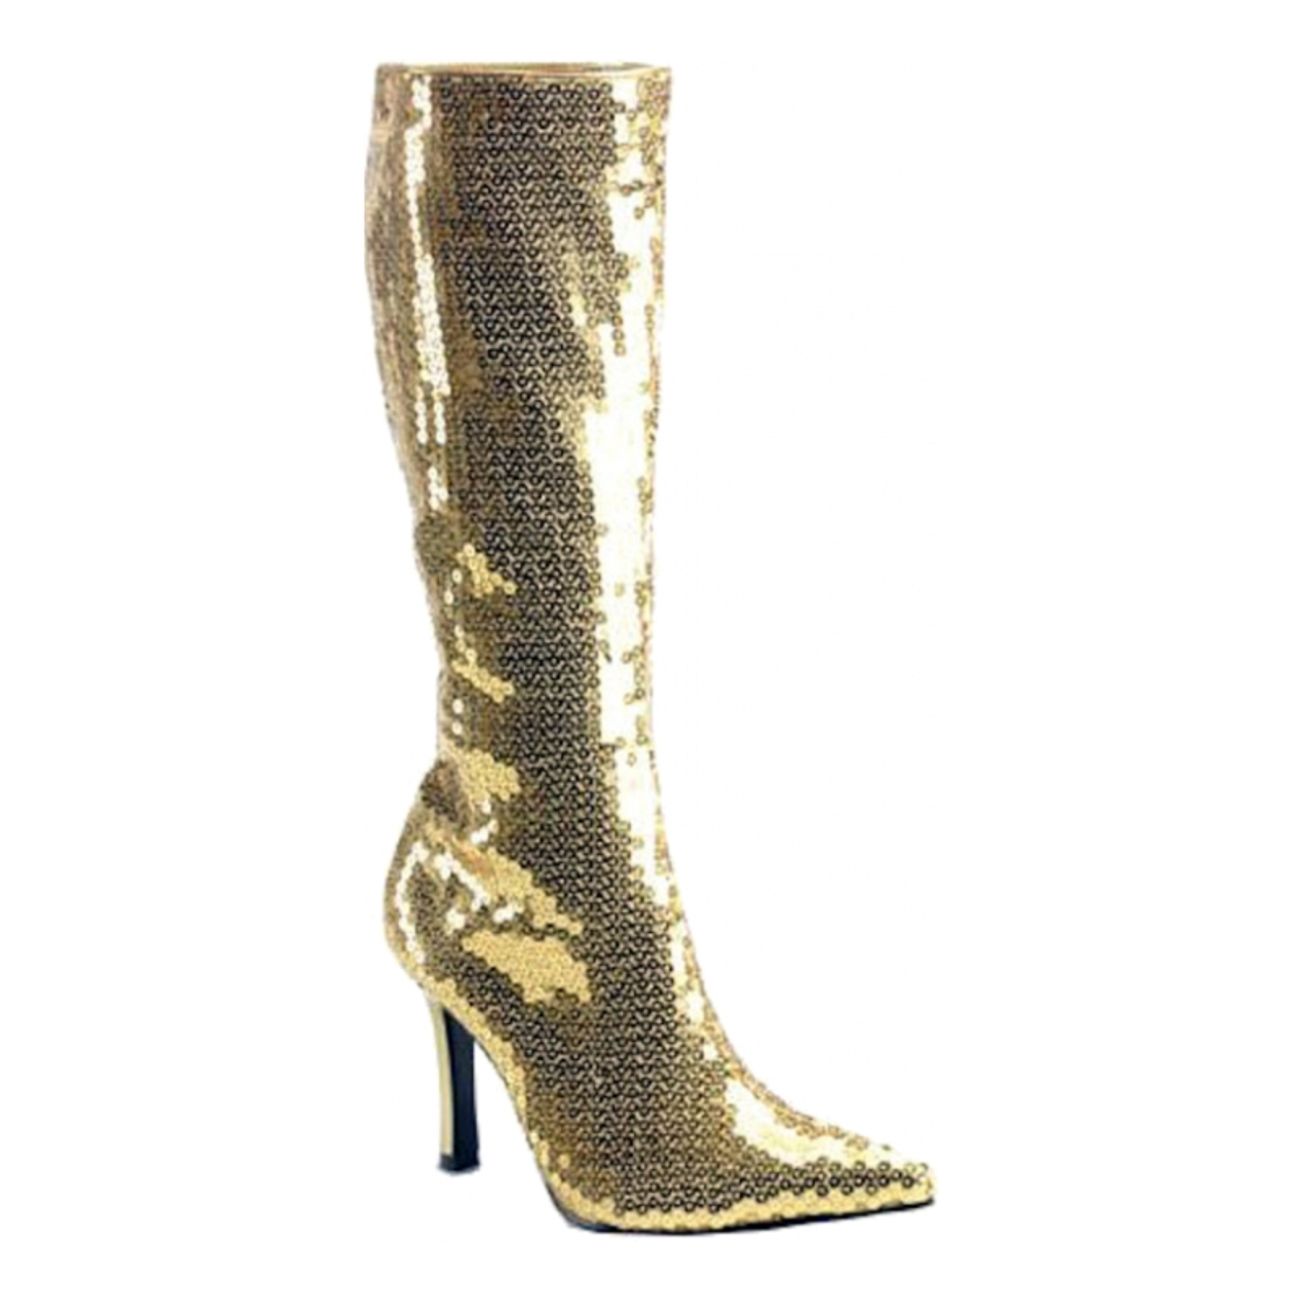 adult-gold-sequined-boots-large-us-size-9-1